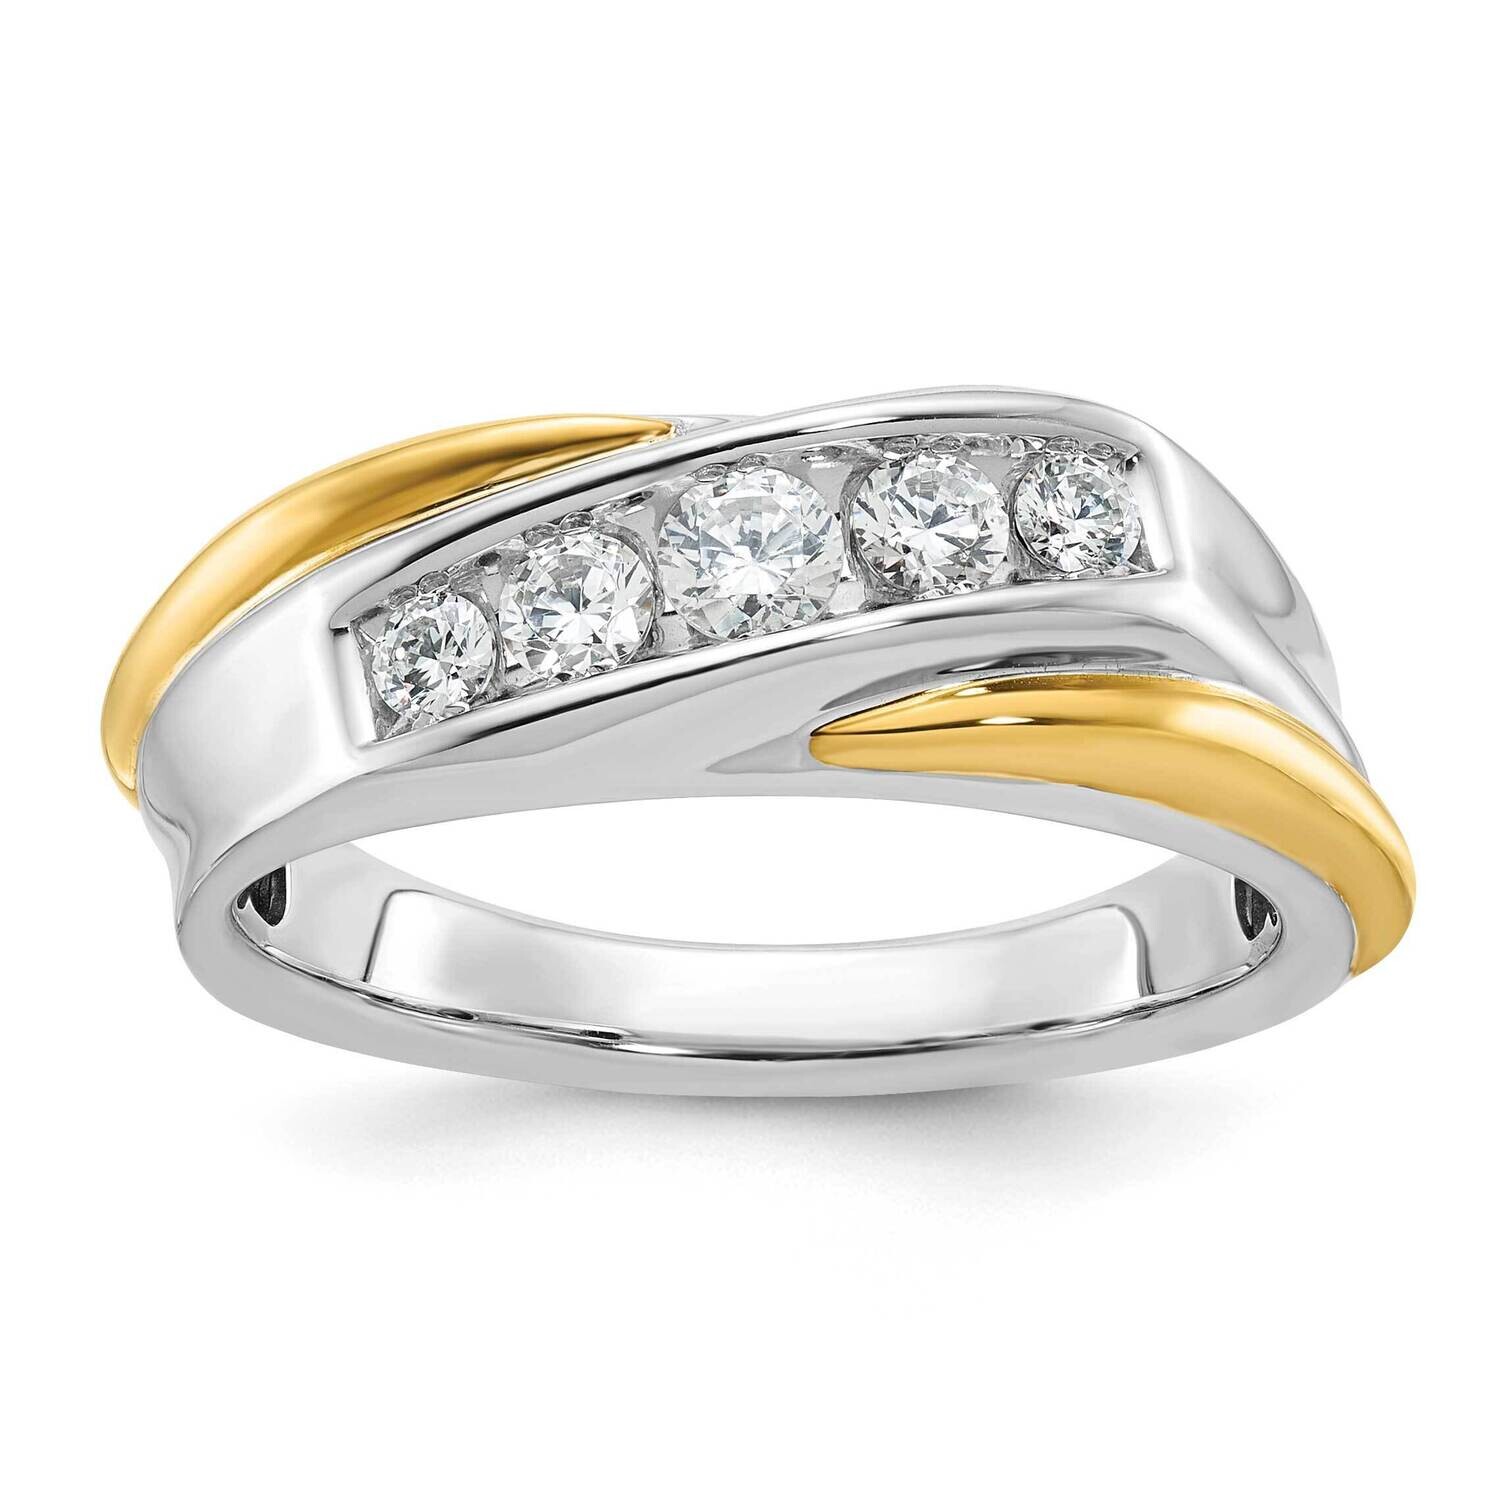 Ibgoodman Men's Polished Grooved 5-Stone Ring Mounting 14k Two-Tone Gold B64110-4WY